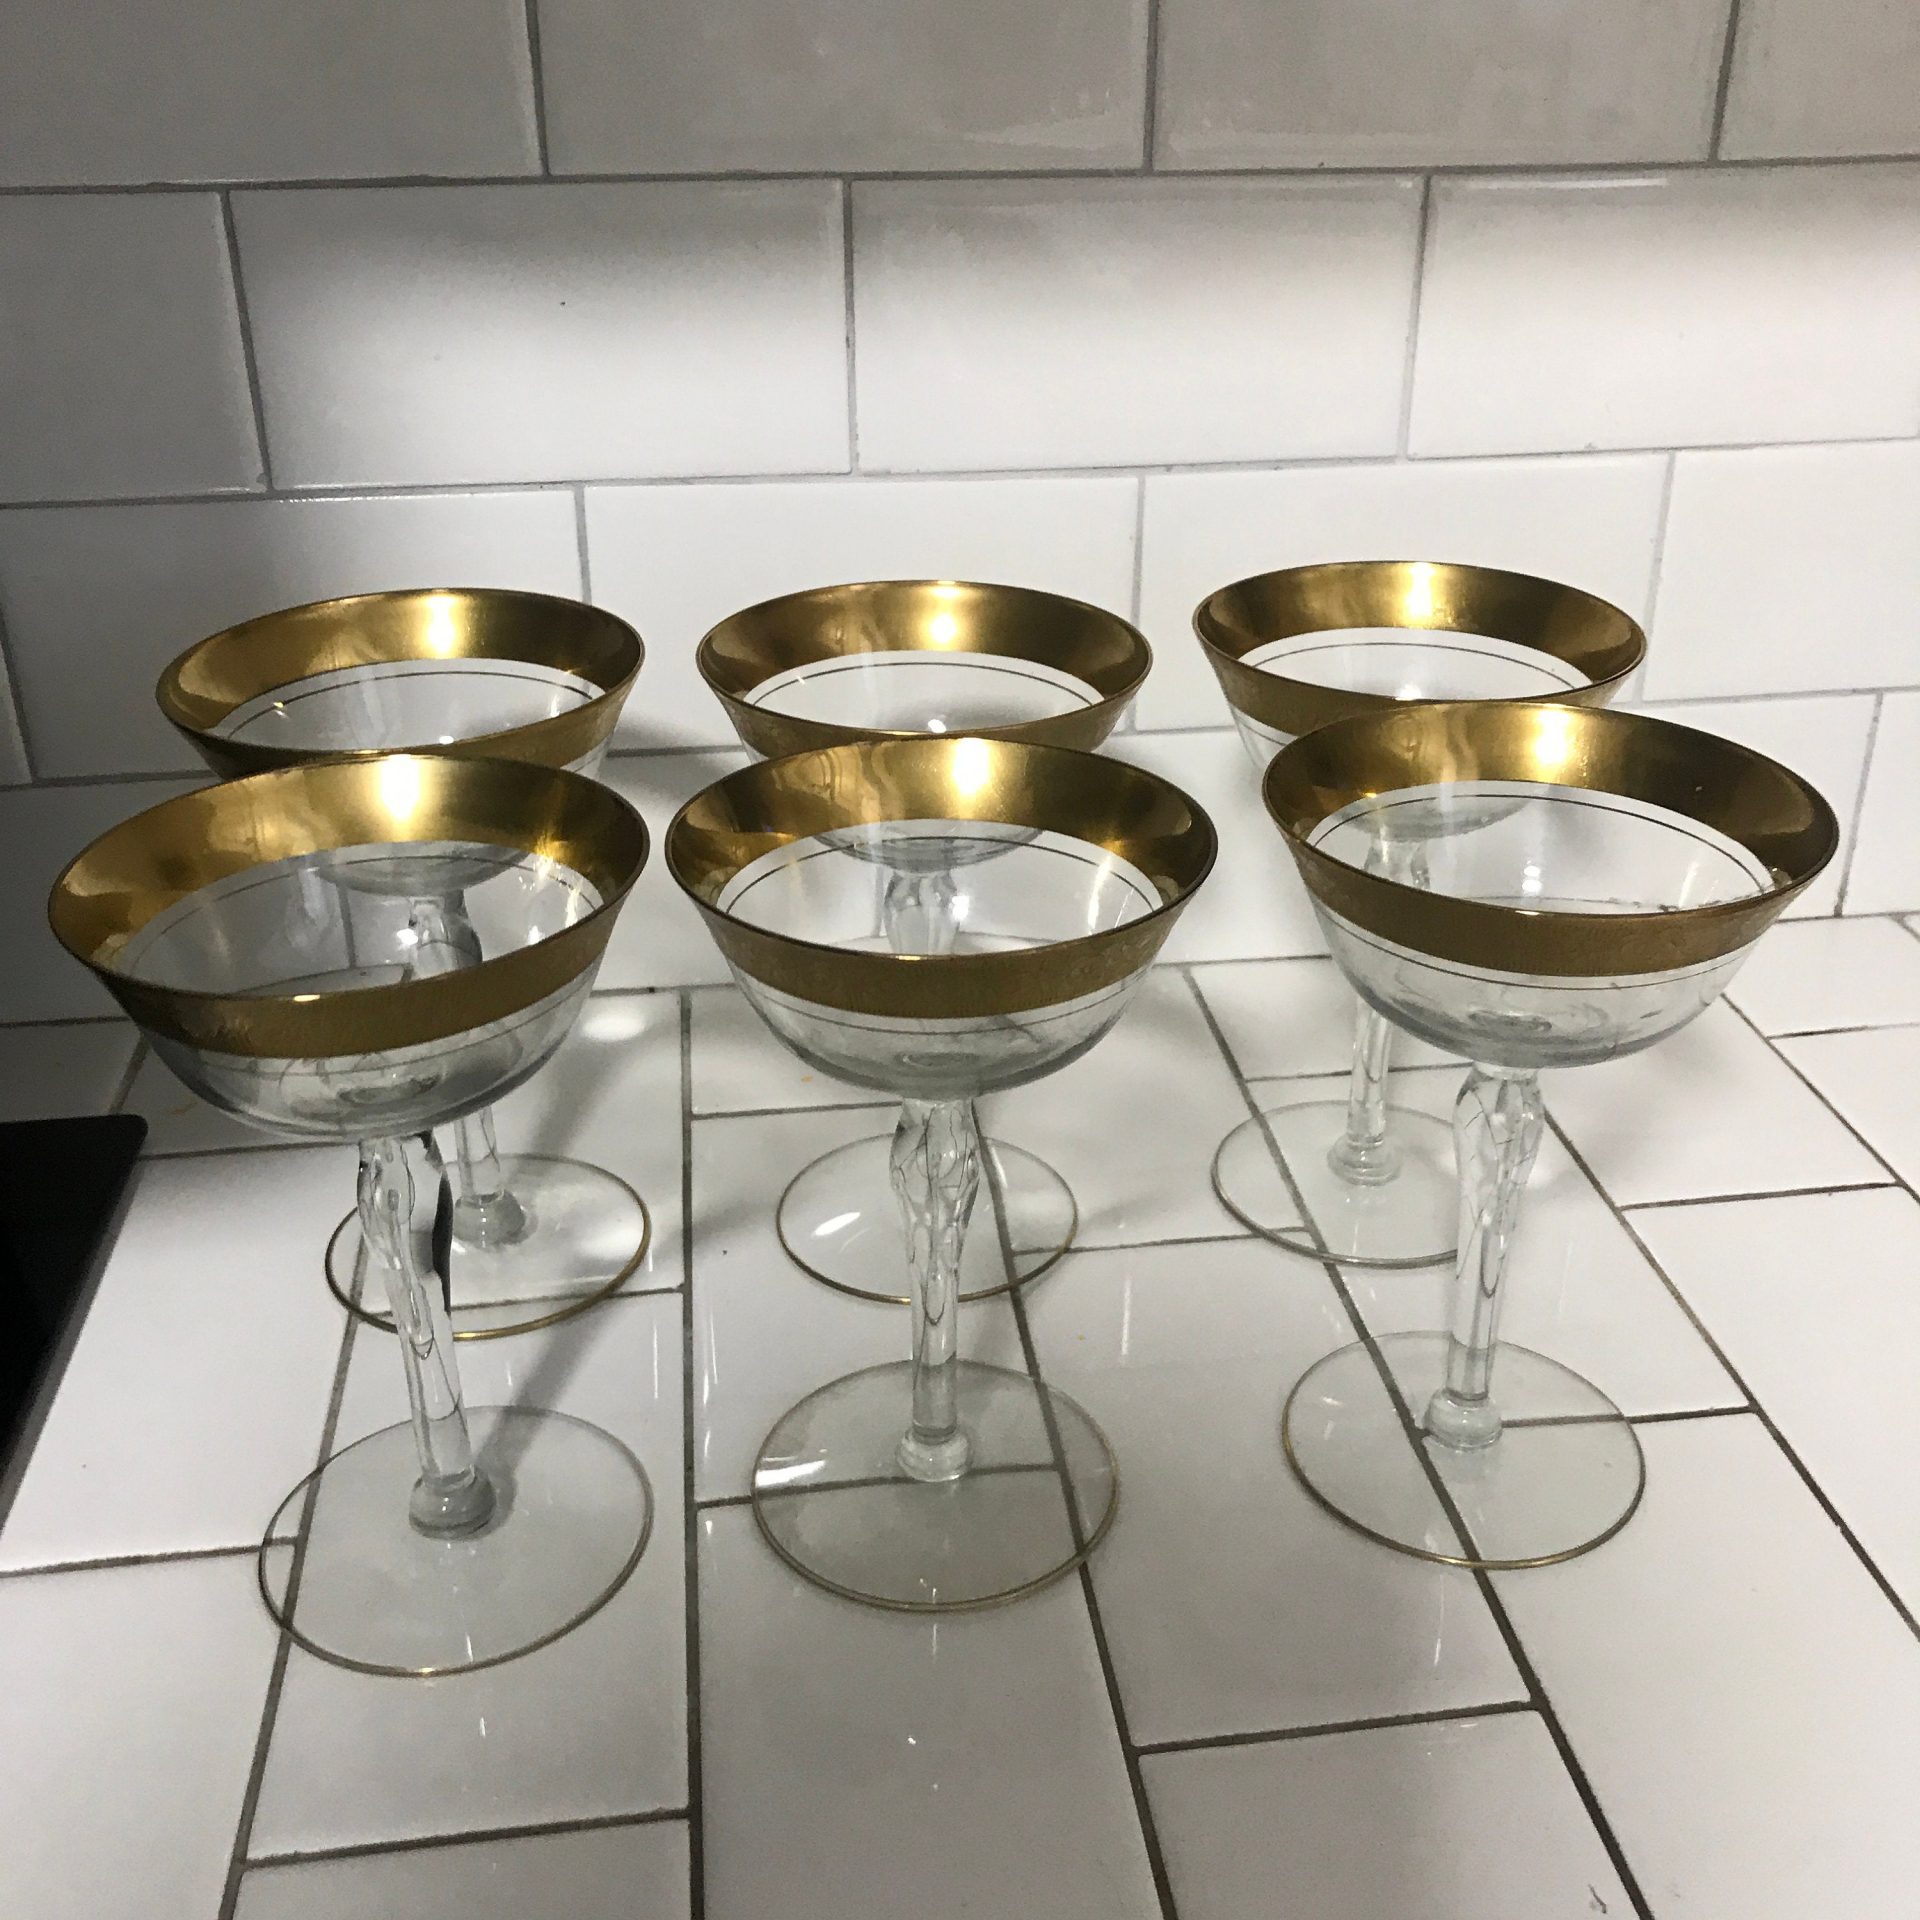 https://www.truevintageantiques.com/wp-content/uploads/2021/05/vintage-set-of-6-wine-glasses-shallow-champagne-paneled-crystal-with-heavy-gold-ornate-trim-display-collectible-evening-dining-6099095d2-scaled.jpg